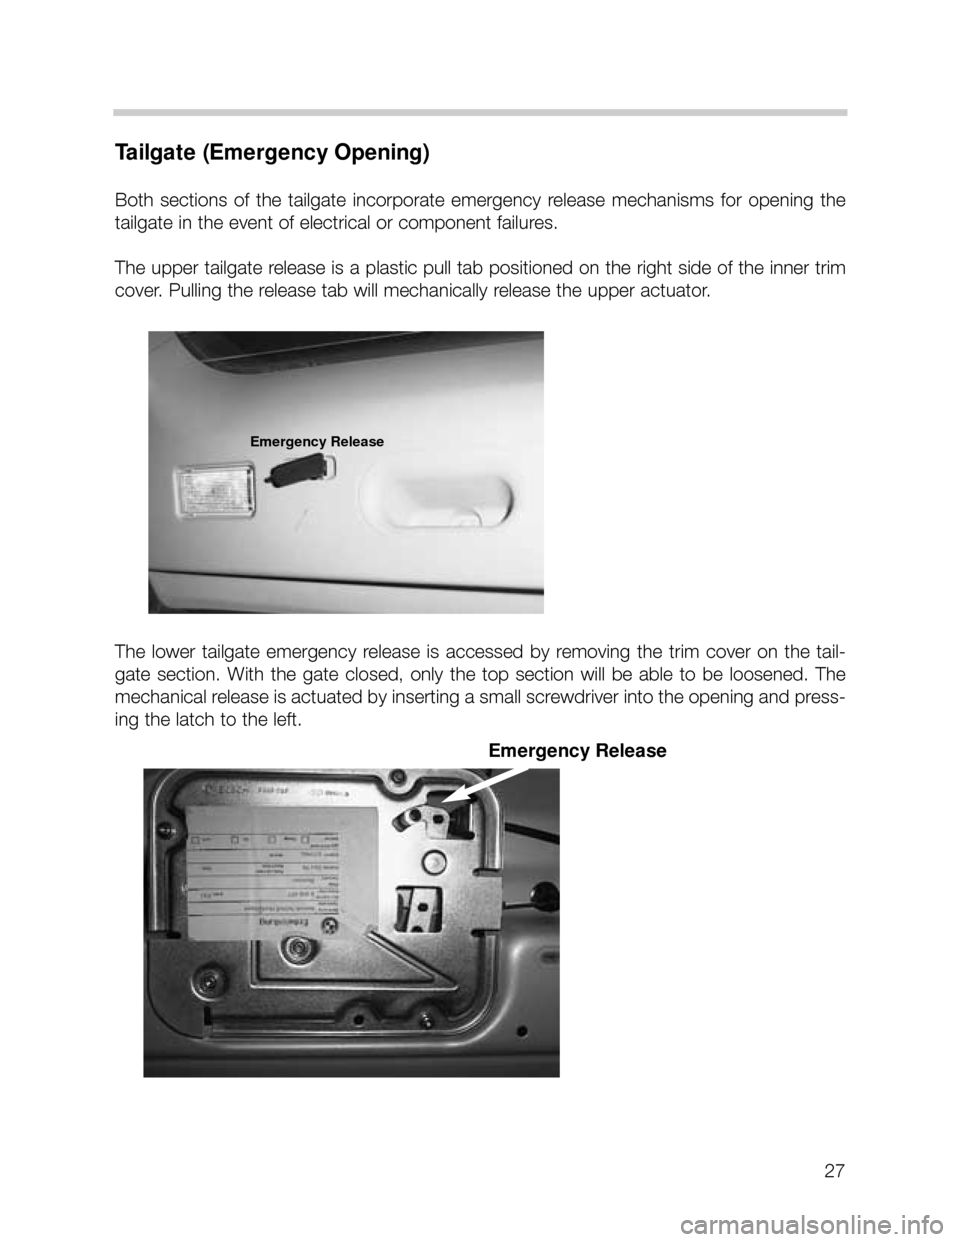 BMW X5 2002 E53 Owners Manual 27
Tailgate (Emergency Opening)
Both  sections  of  the  tailgate  incorporate  emergency  release  mechanisms  for  opening  the
tailgate in the event of electrical or component failures. 
The upper 